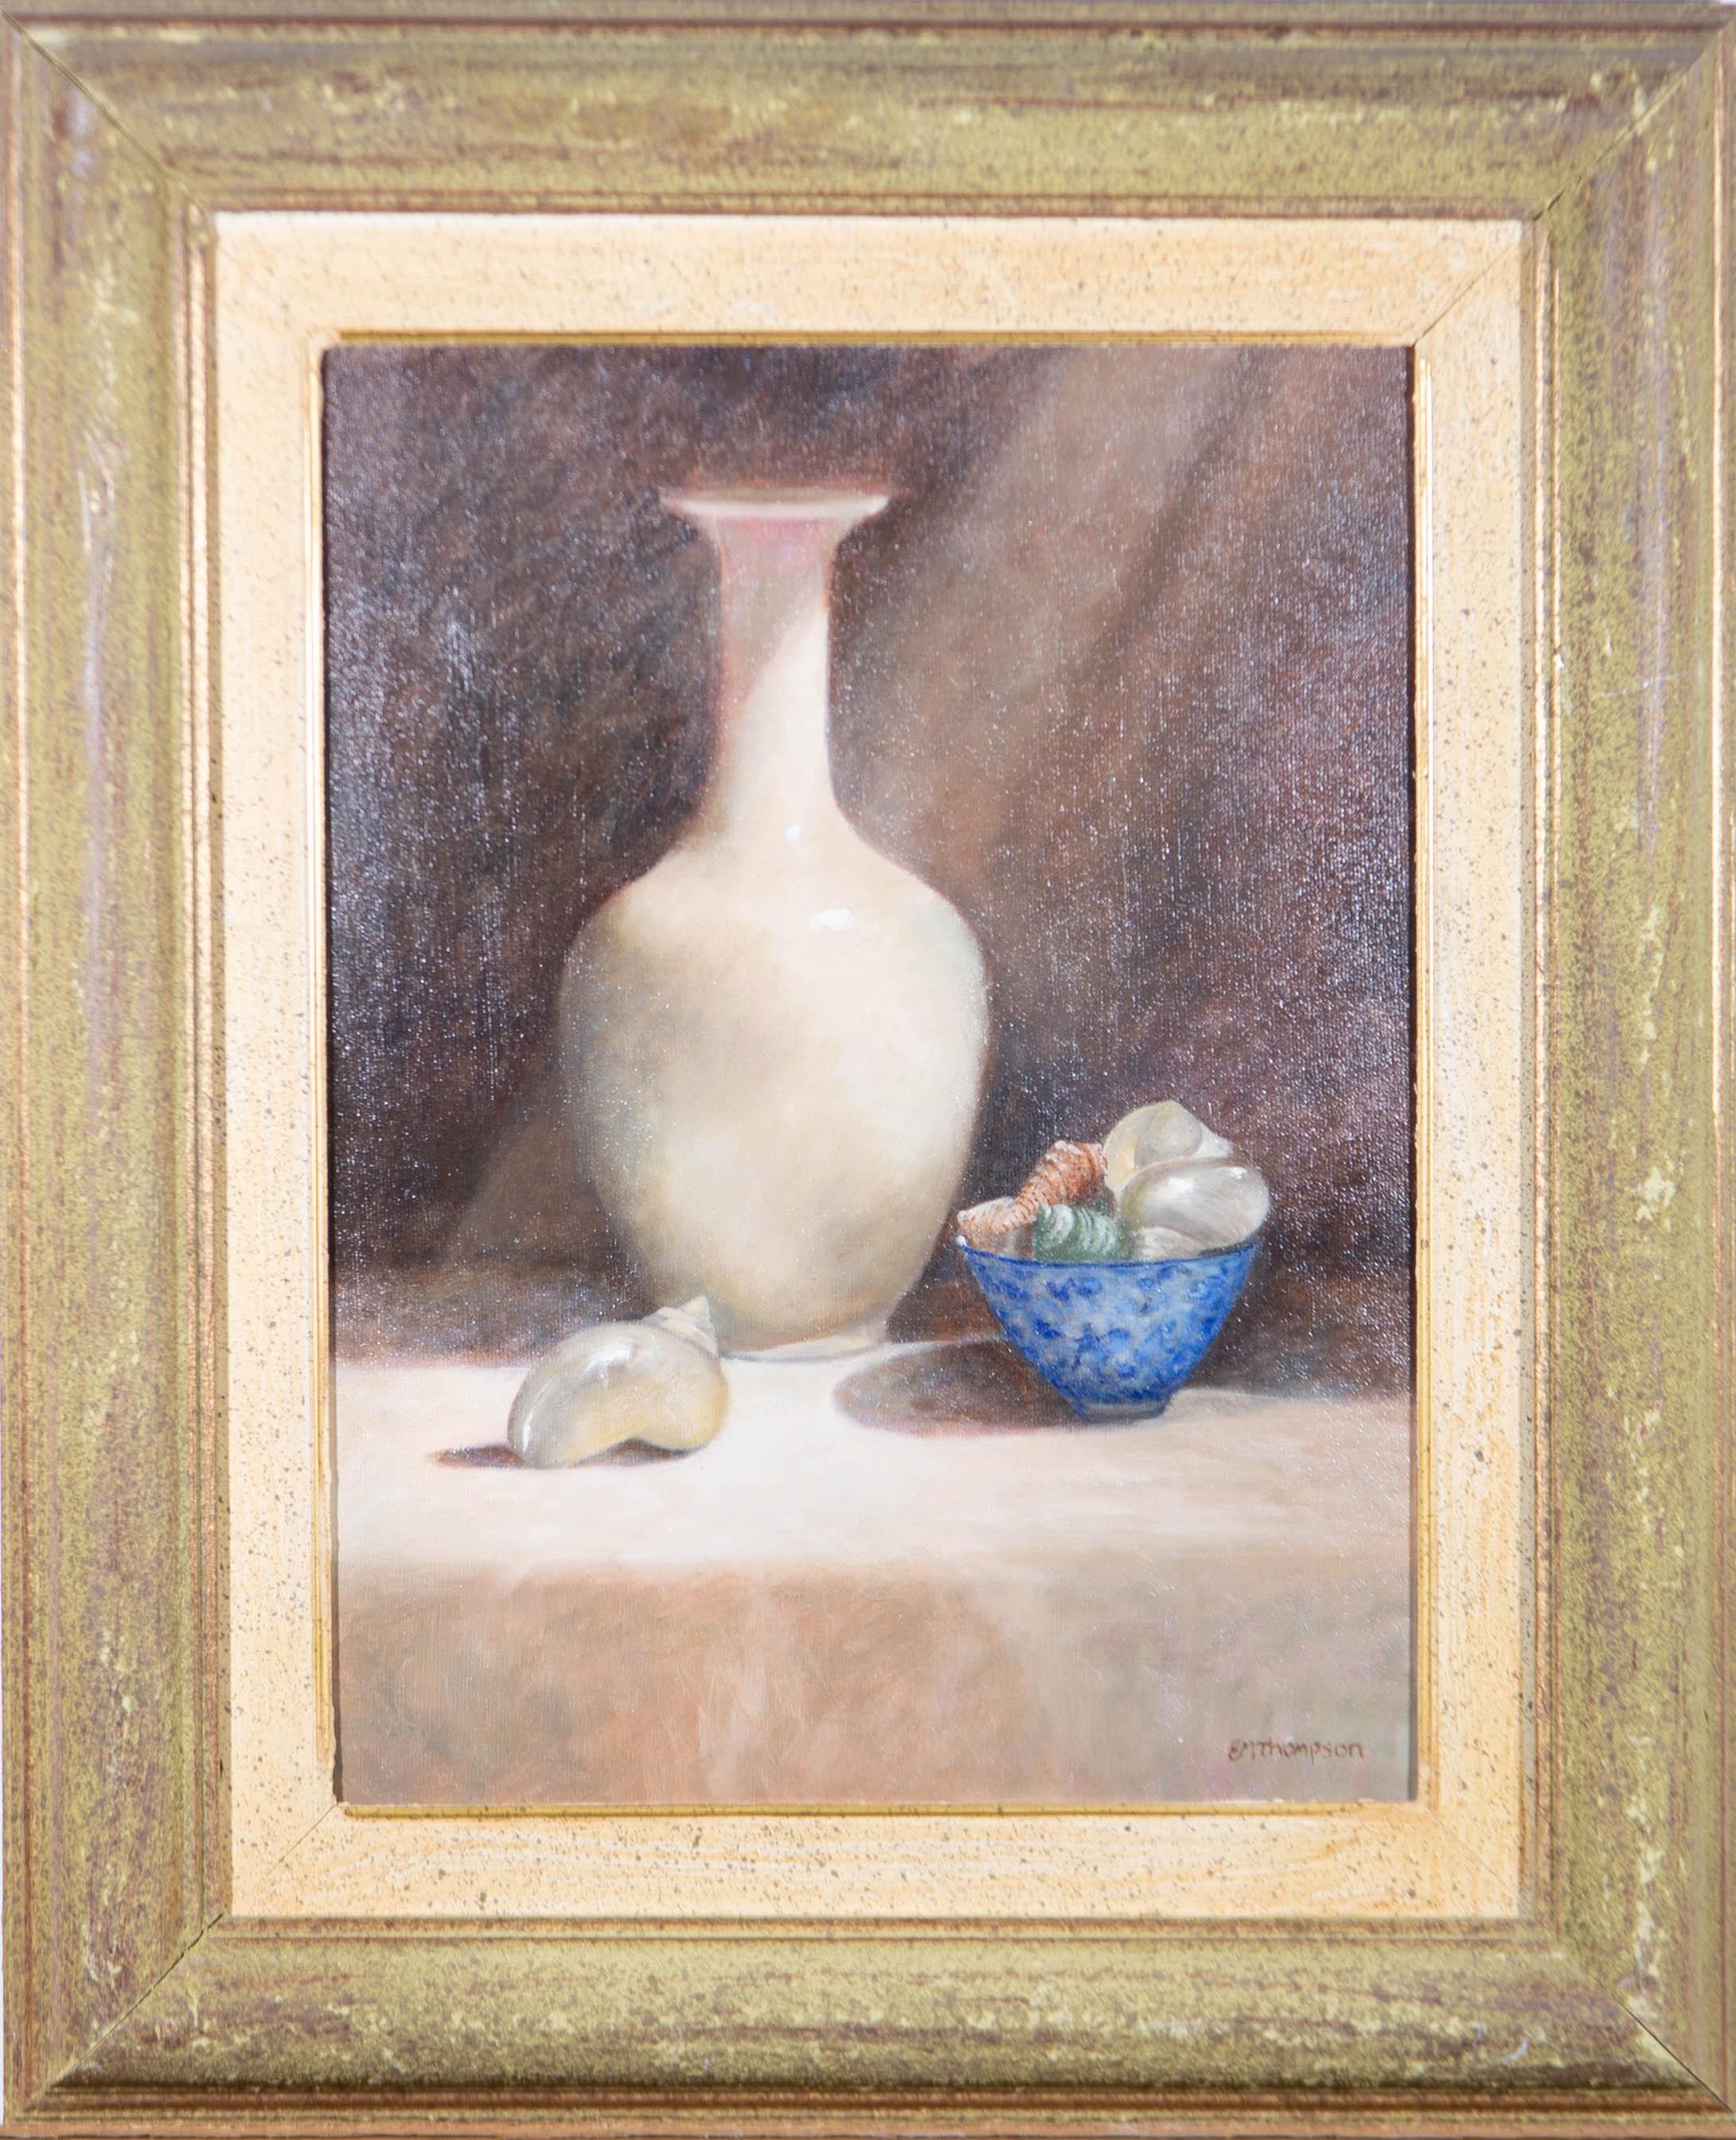 Unknown Still-Life Painting - E.M. Thompson - Framed 20th Century Oil, Still Life with Sea Shells